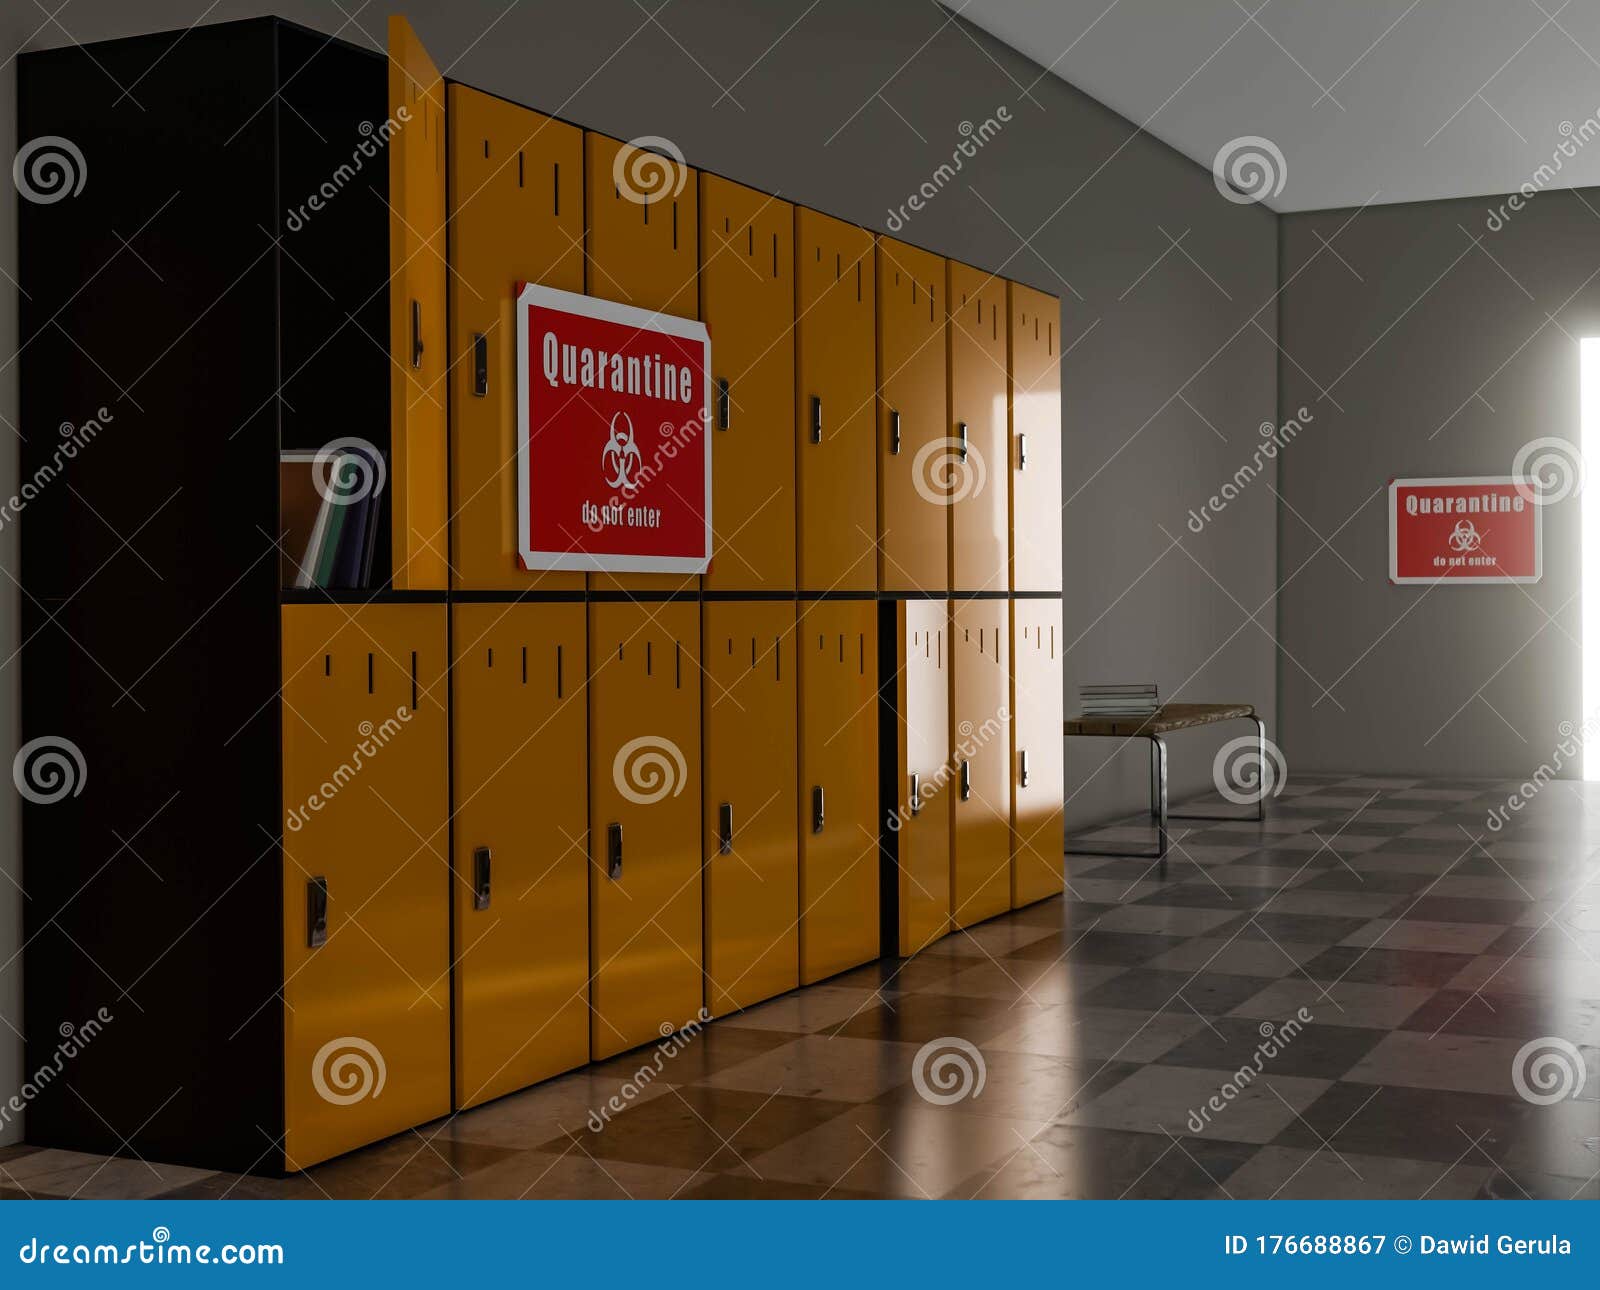 Free Pictures Of Lockers Or Locker Signs